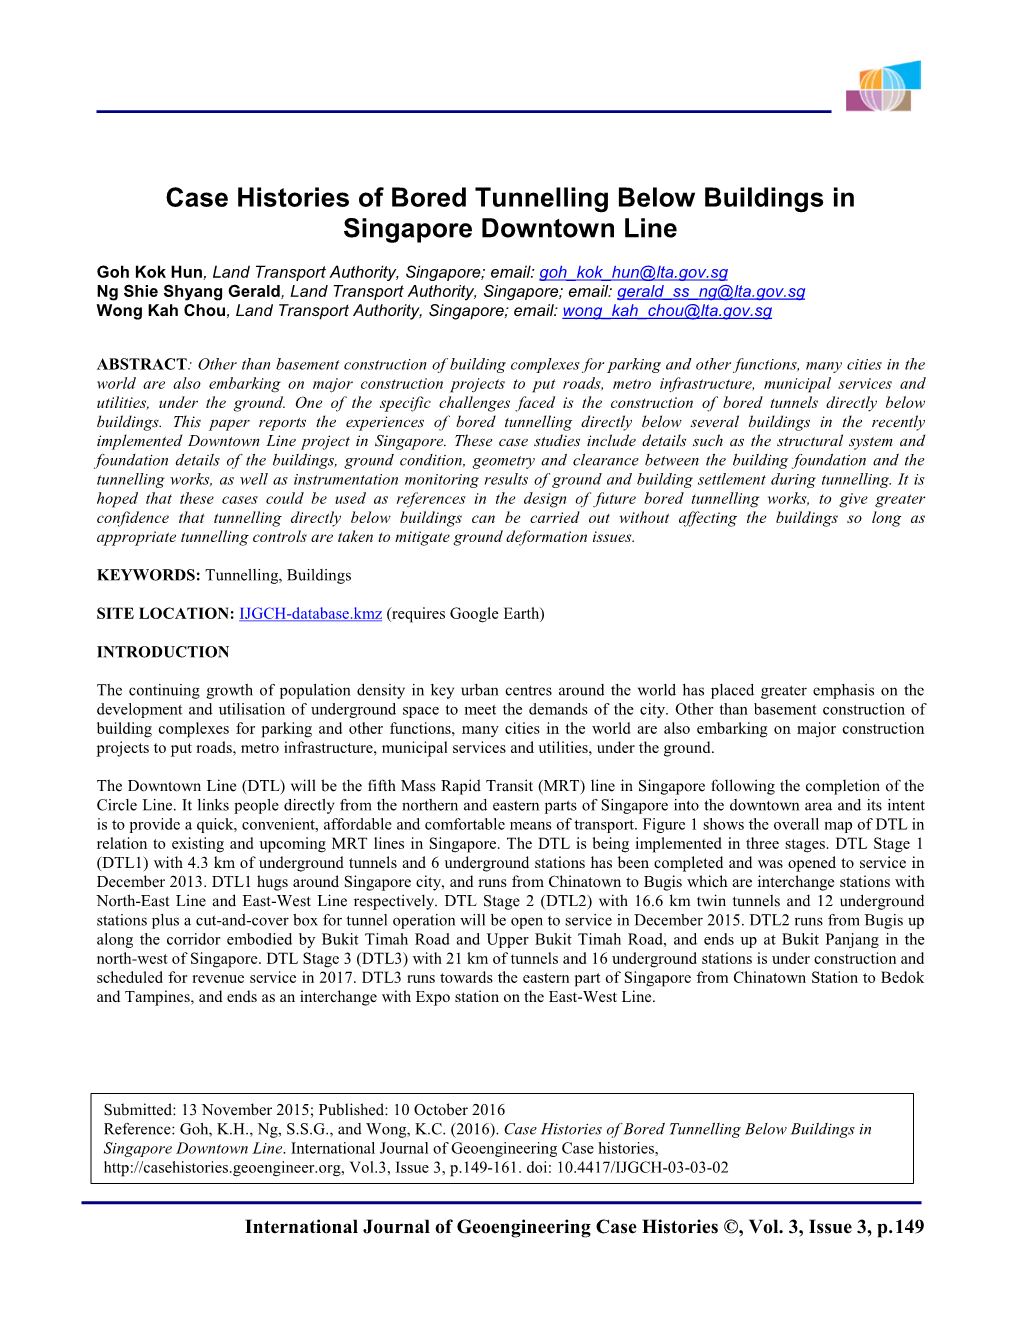 Case Histories of Bored Tunnelling Below Buildings in Singapore Downtown Line